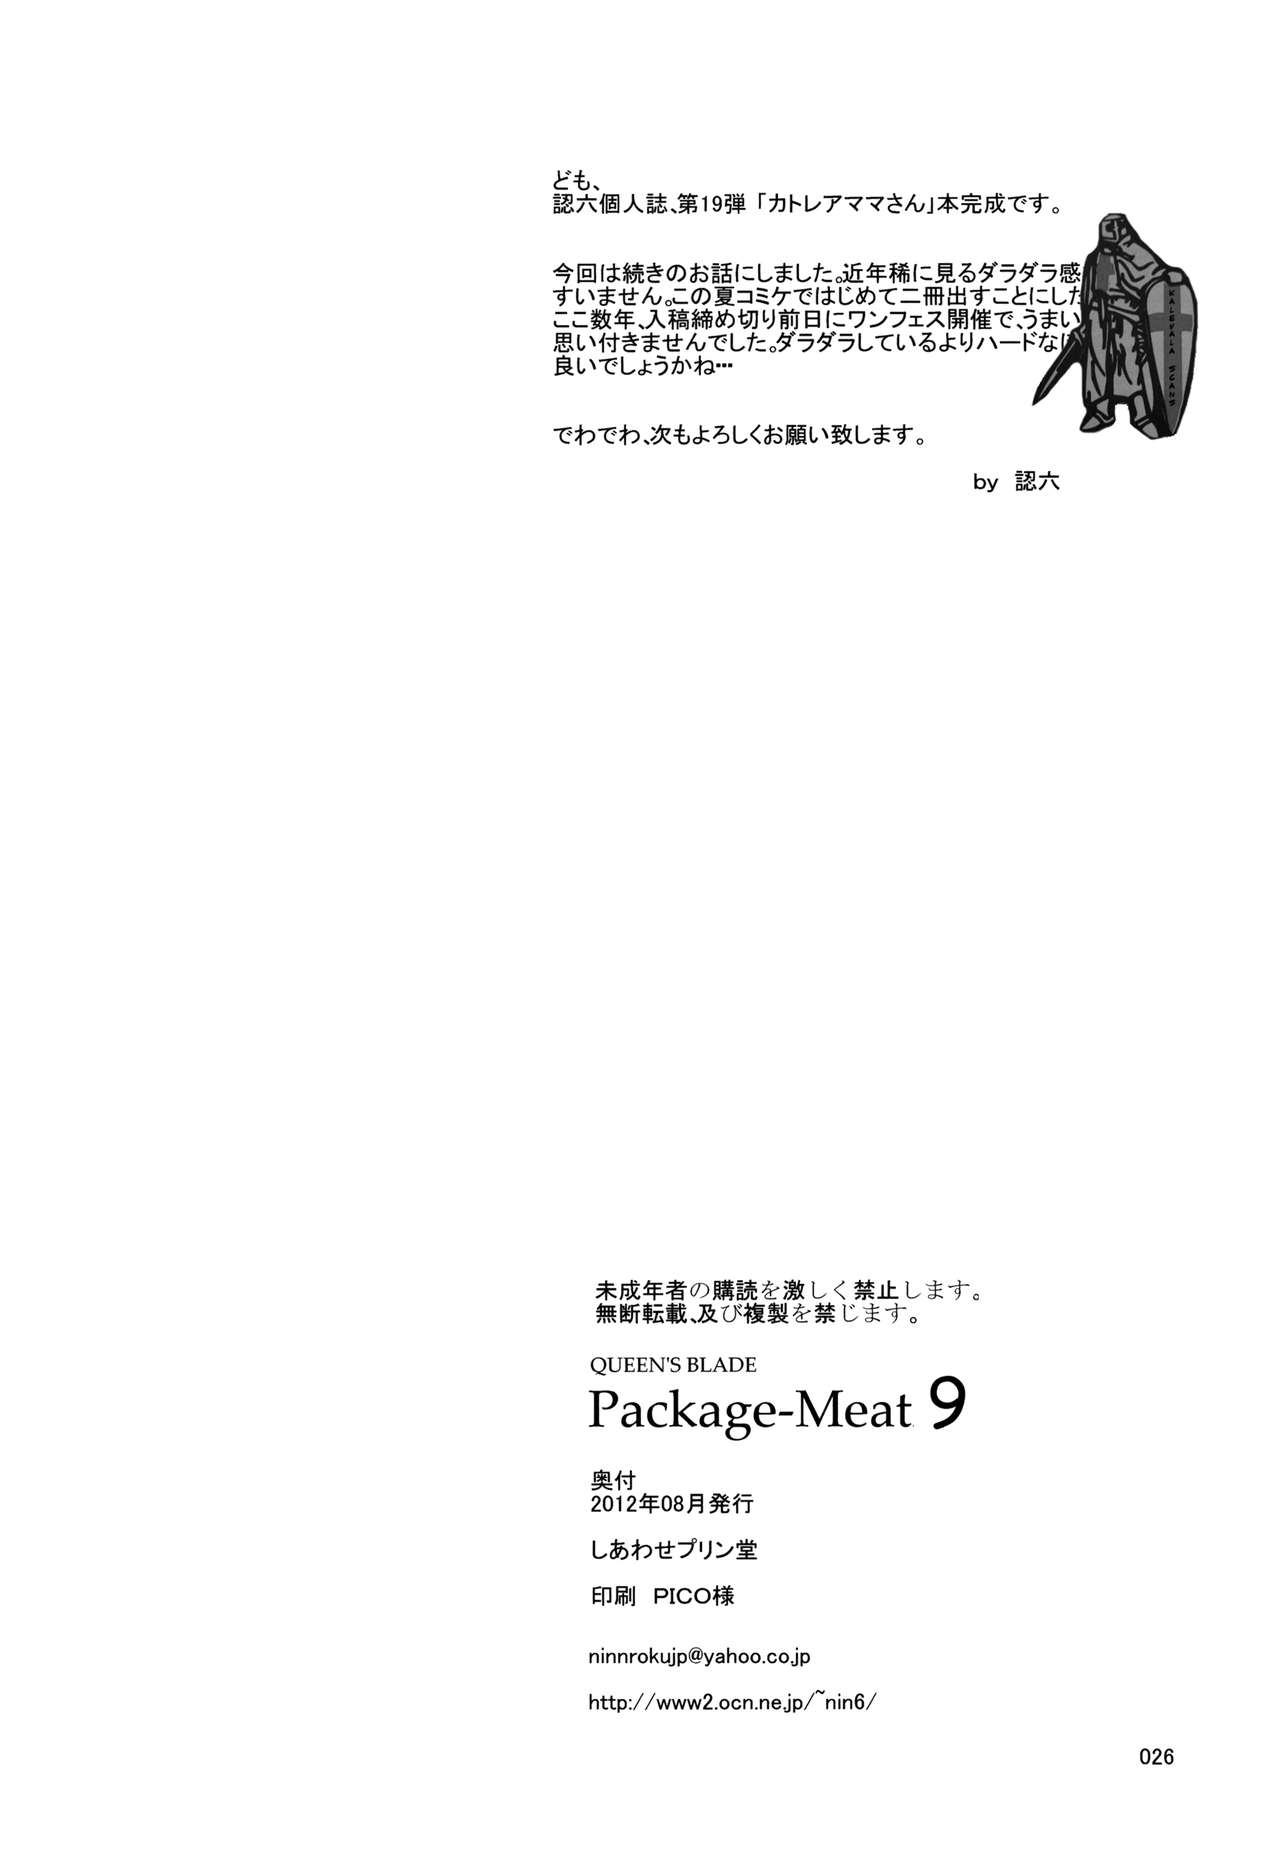 Package Meat 9 numero d'image 25